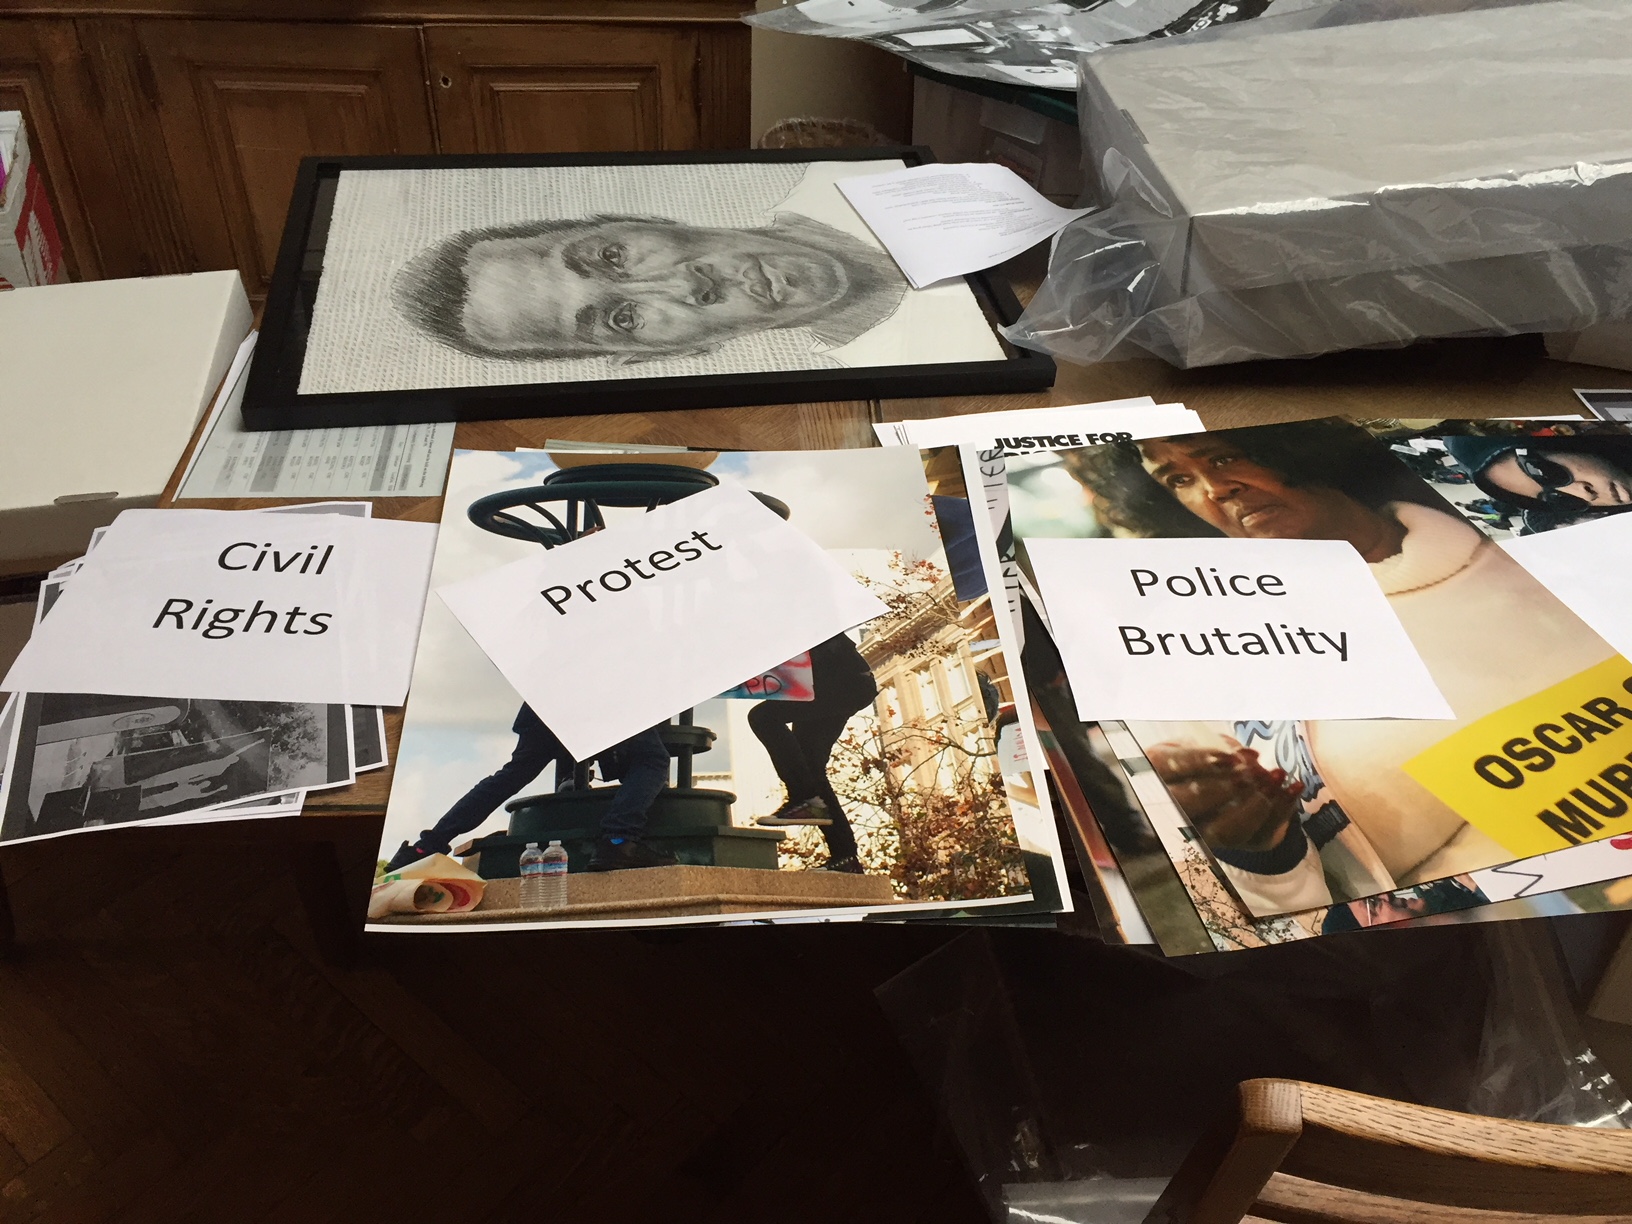 Figure 1. Materials used during focus group, California History Center, March 24, 2018. All images by author.